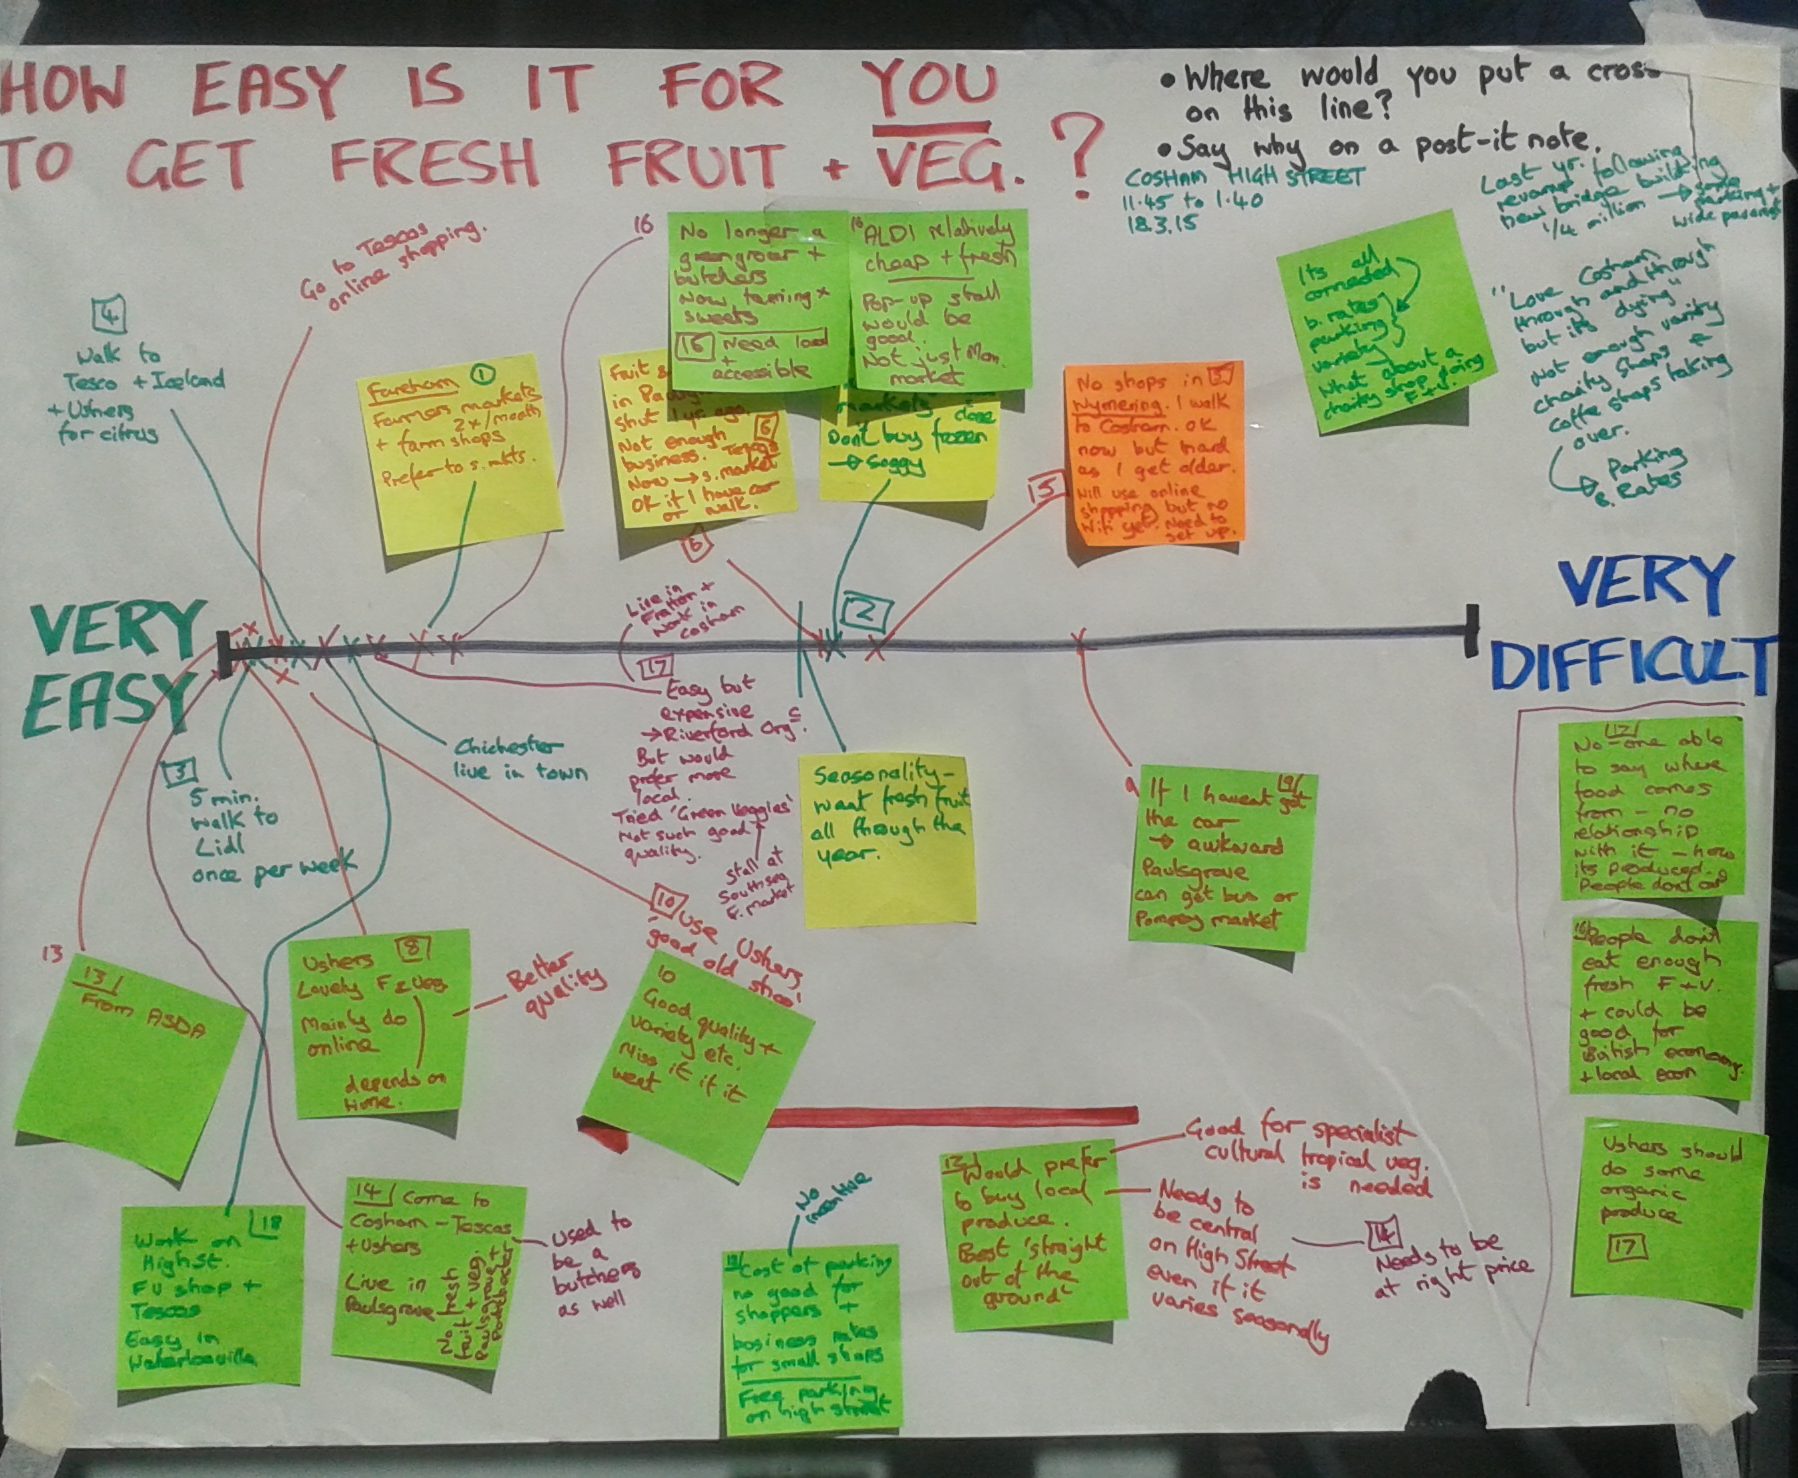 Community participation to democratise food whiteboard